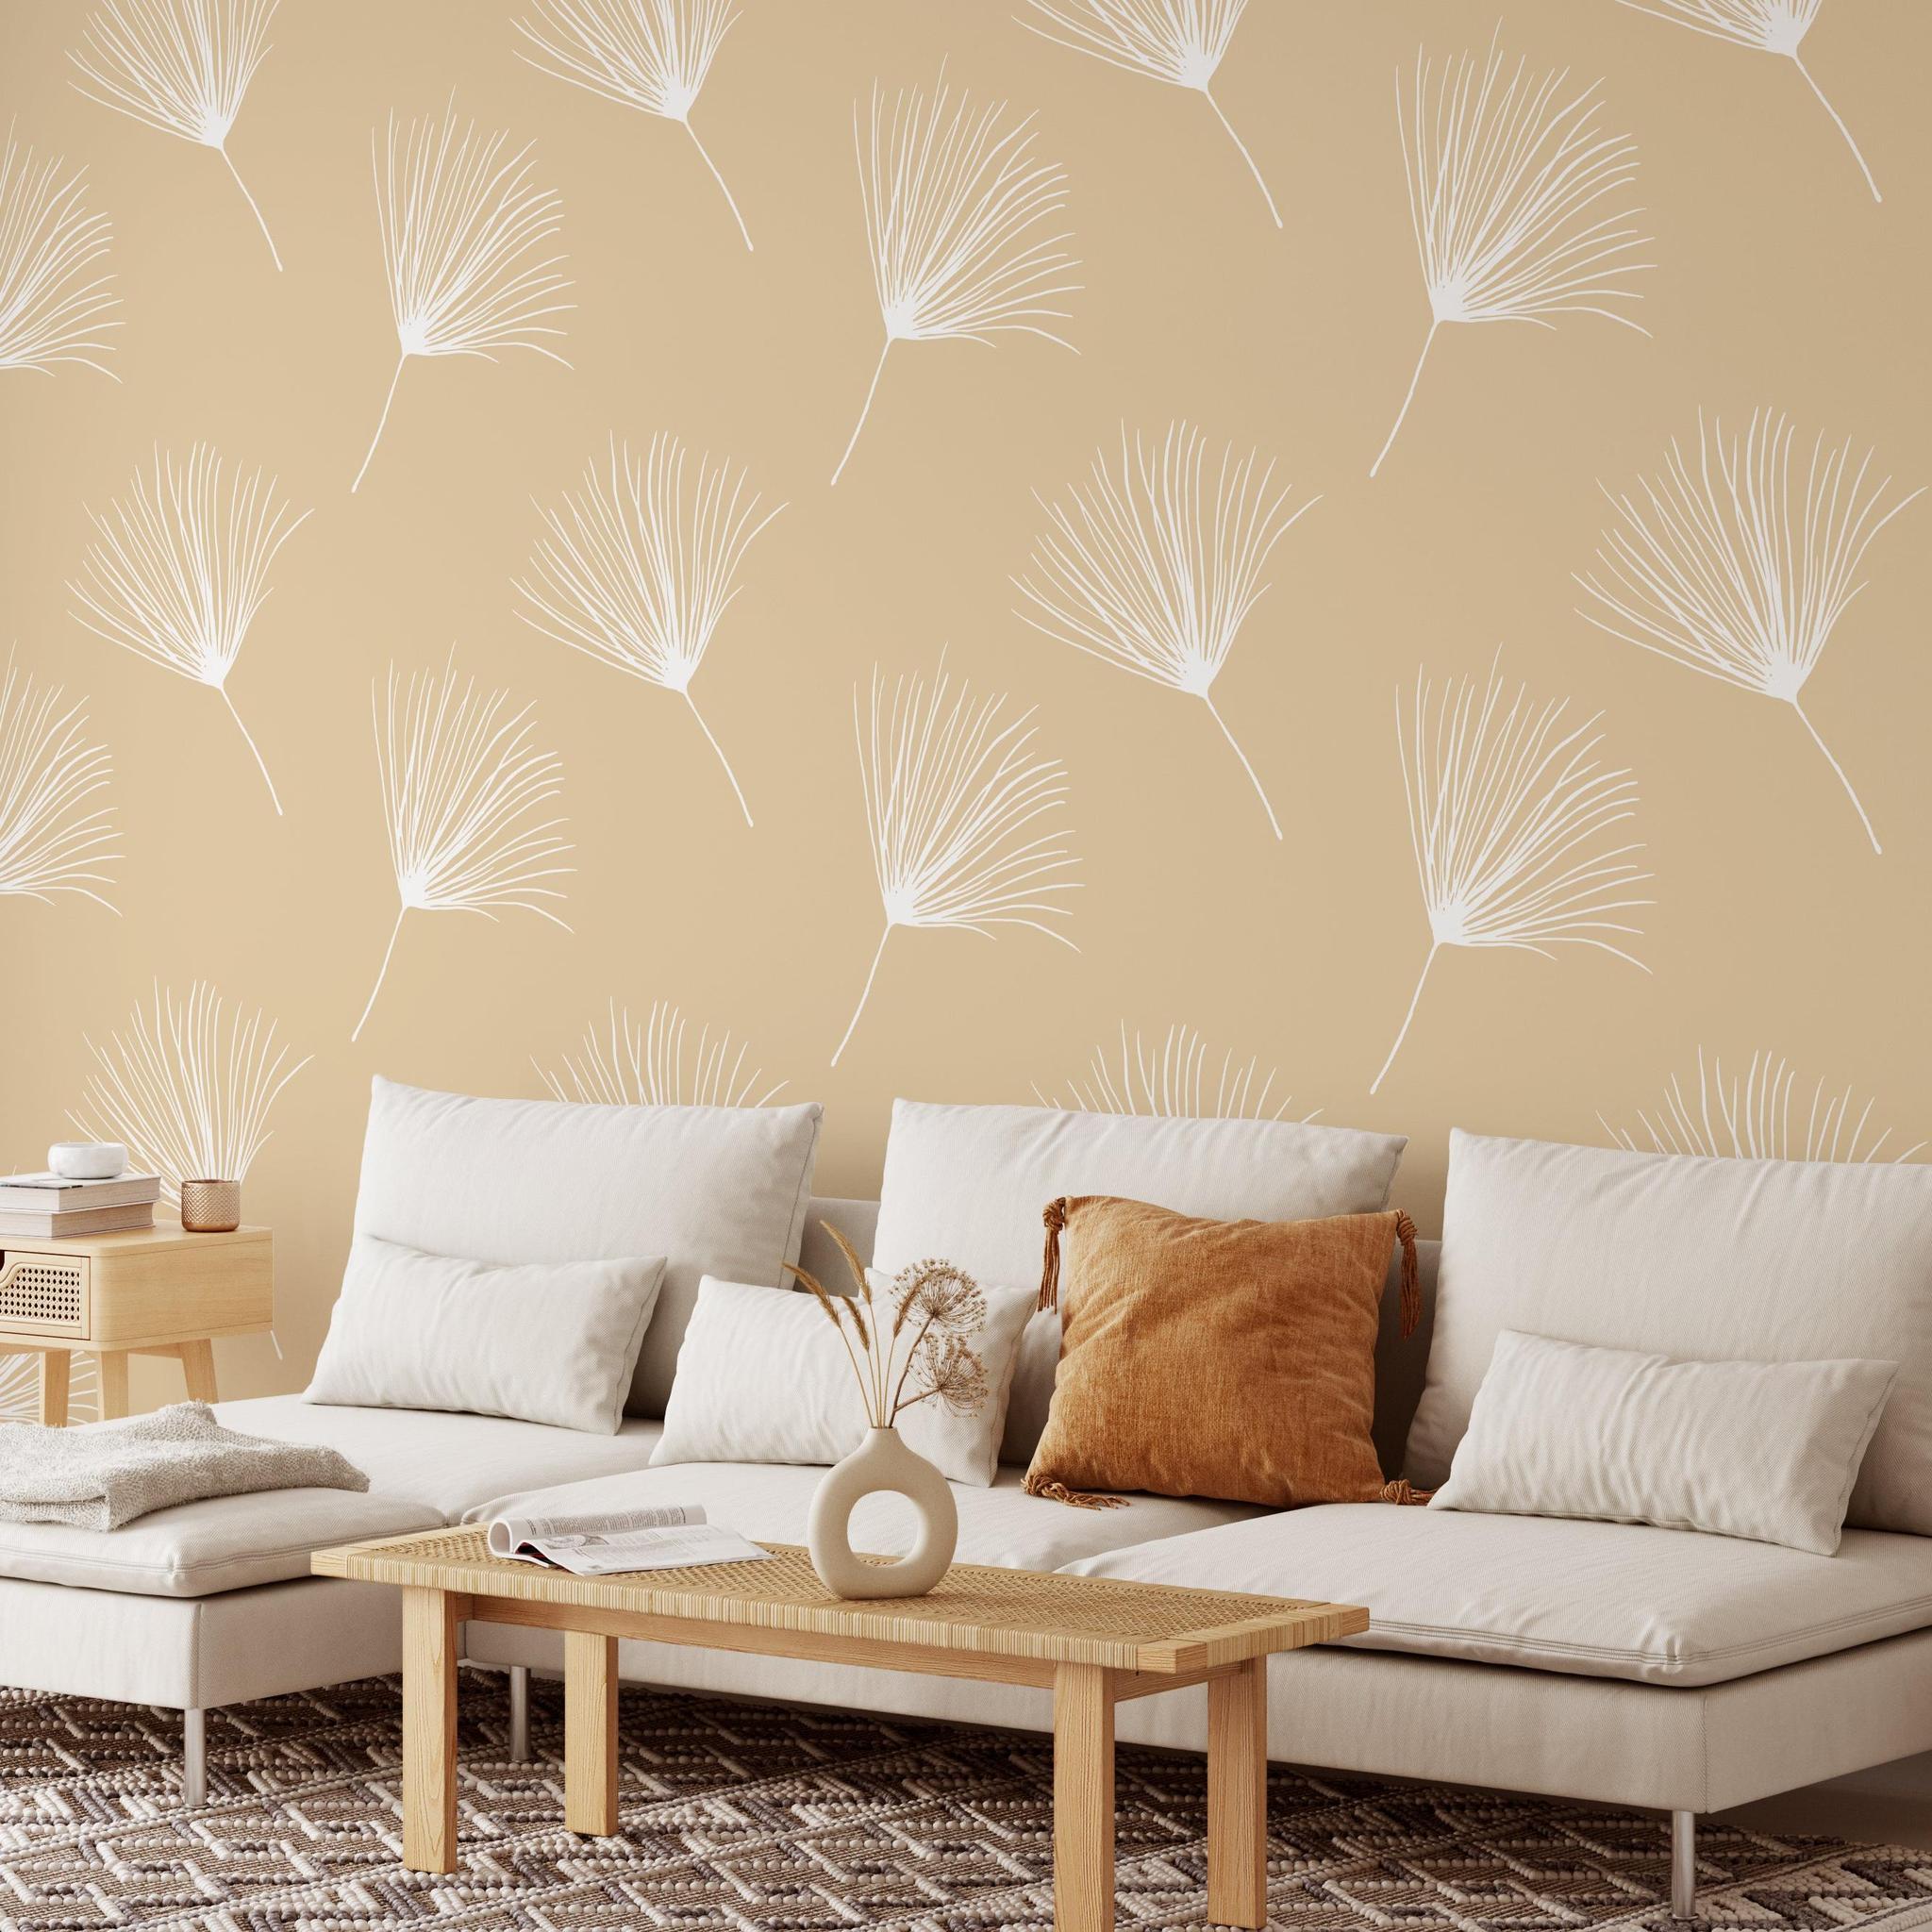 Wish Wallpaper by The Minty Line in a modern living room with stylish beige botanical design.
